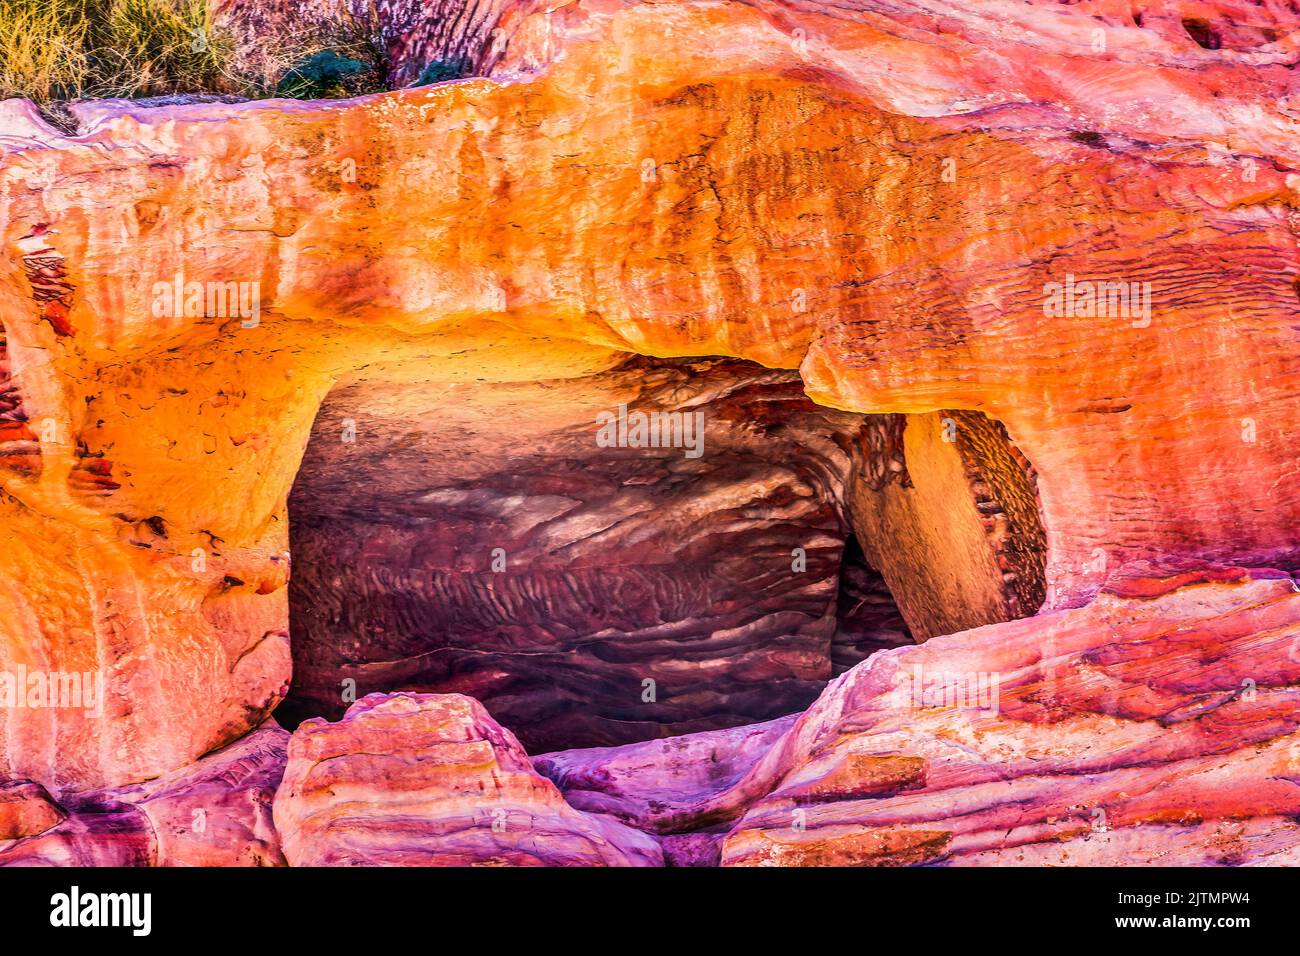 Rose Red Yellow Rock Tomb Street of Facades Petra Jordan Built by Nabataens in 200 BC to 400 AD Canyon walls create many colorful abstracts close up Stock Photo